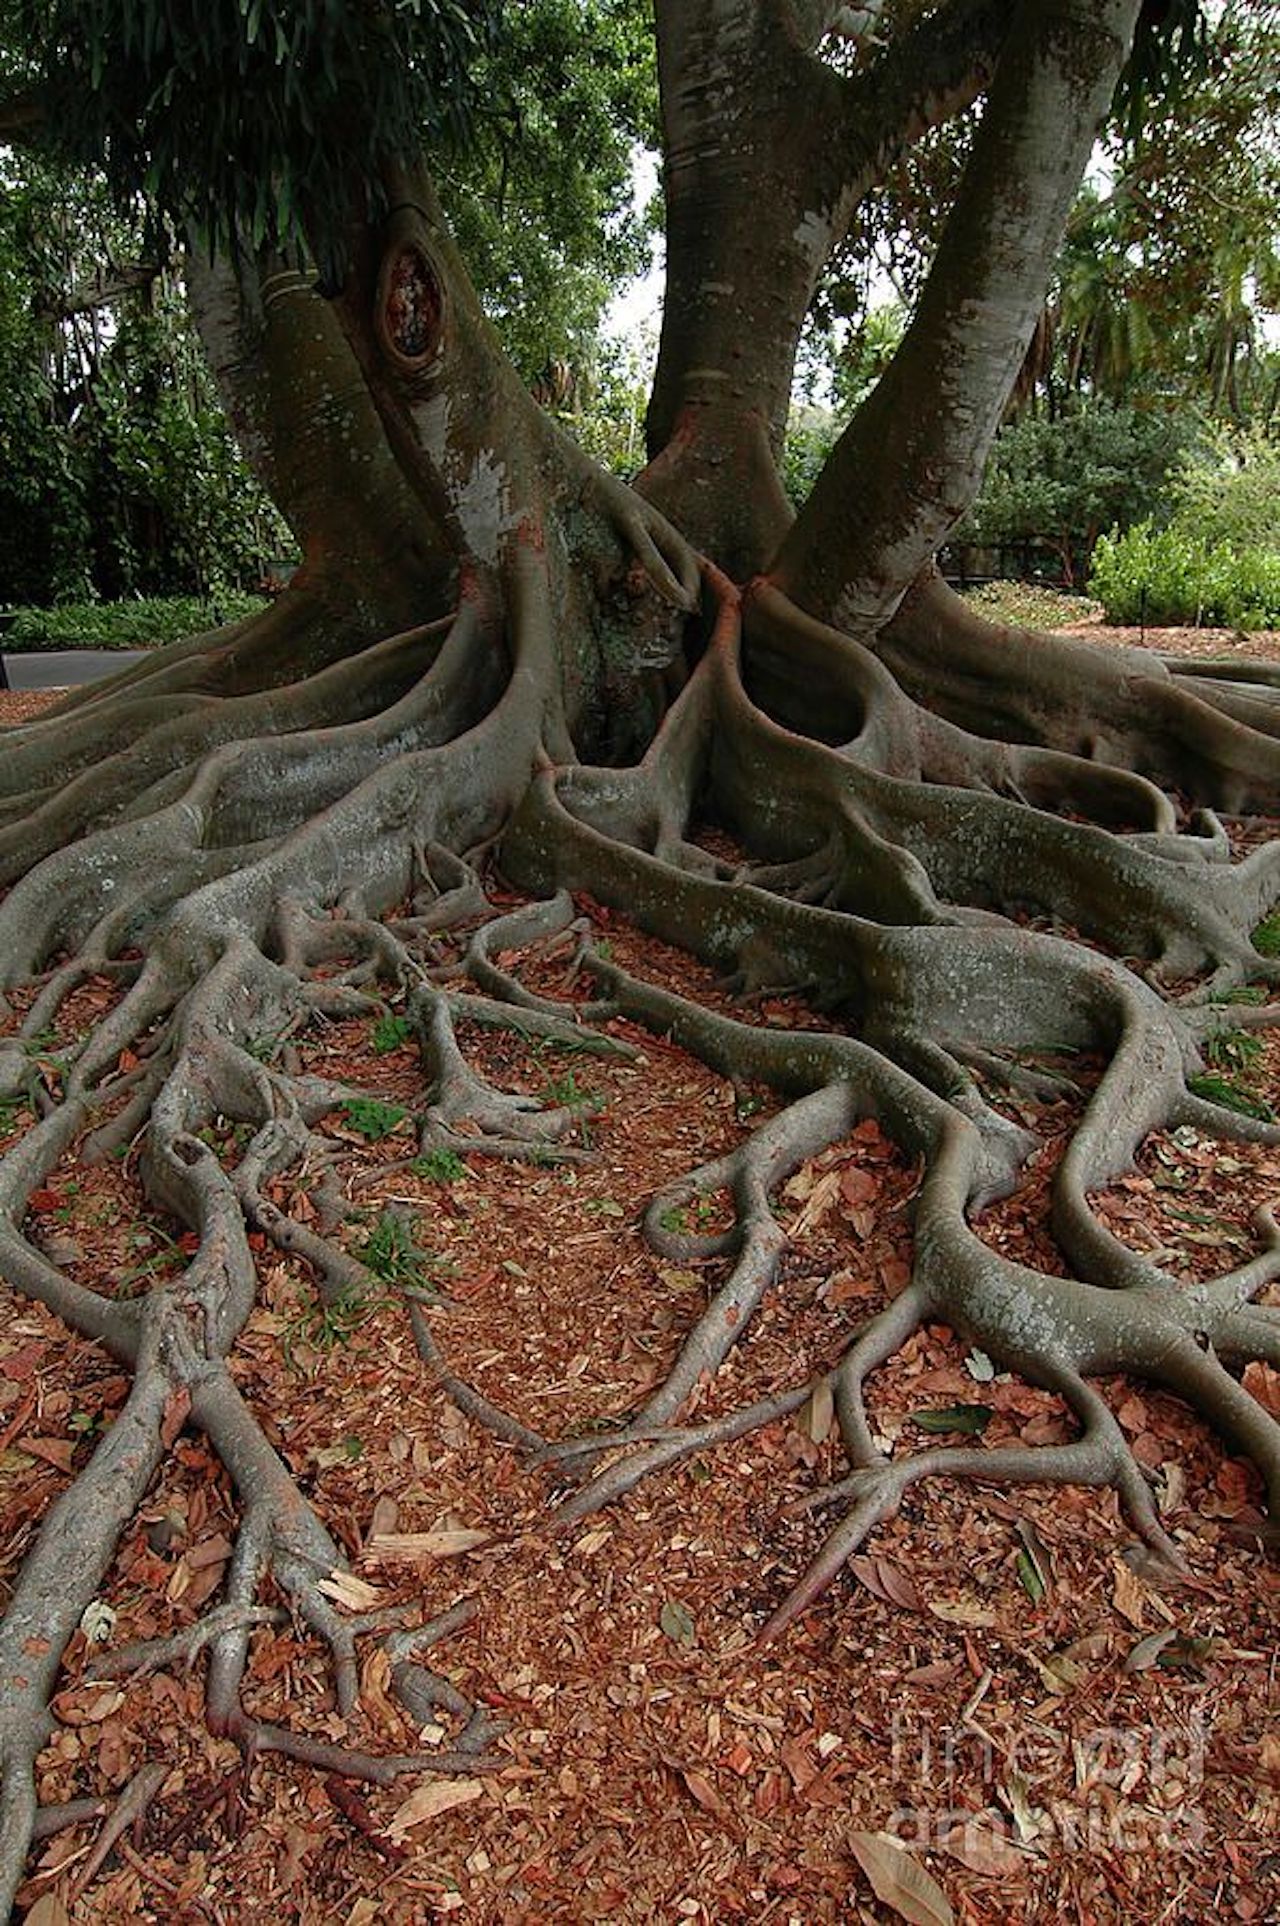 A banyan tree with aerial prop roots that mature into thick, woody trunks, which can become indistinguishable from the primary trunk with age